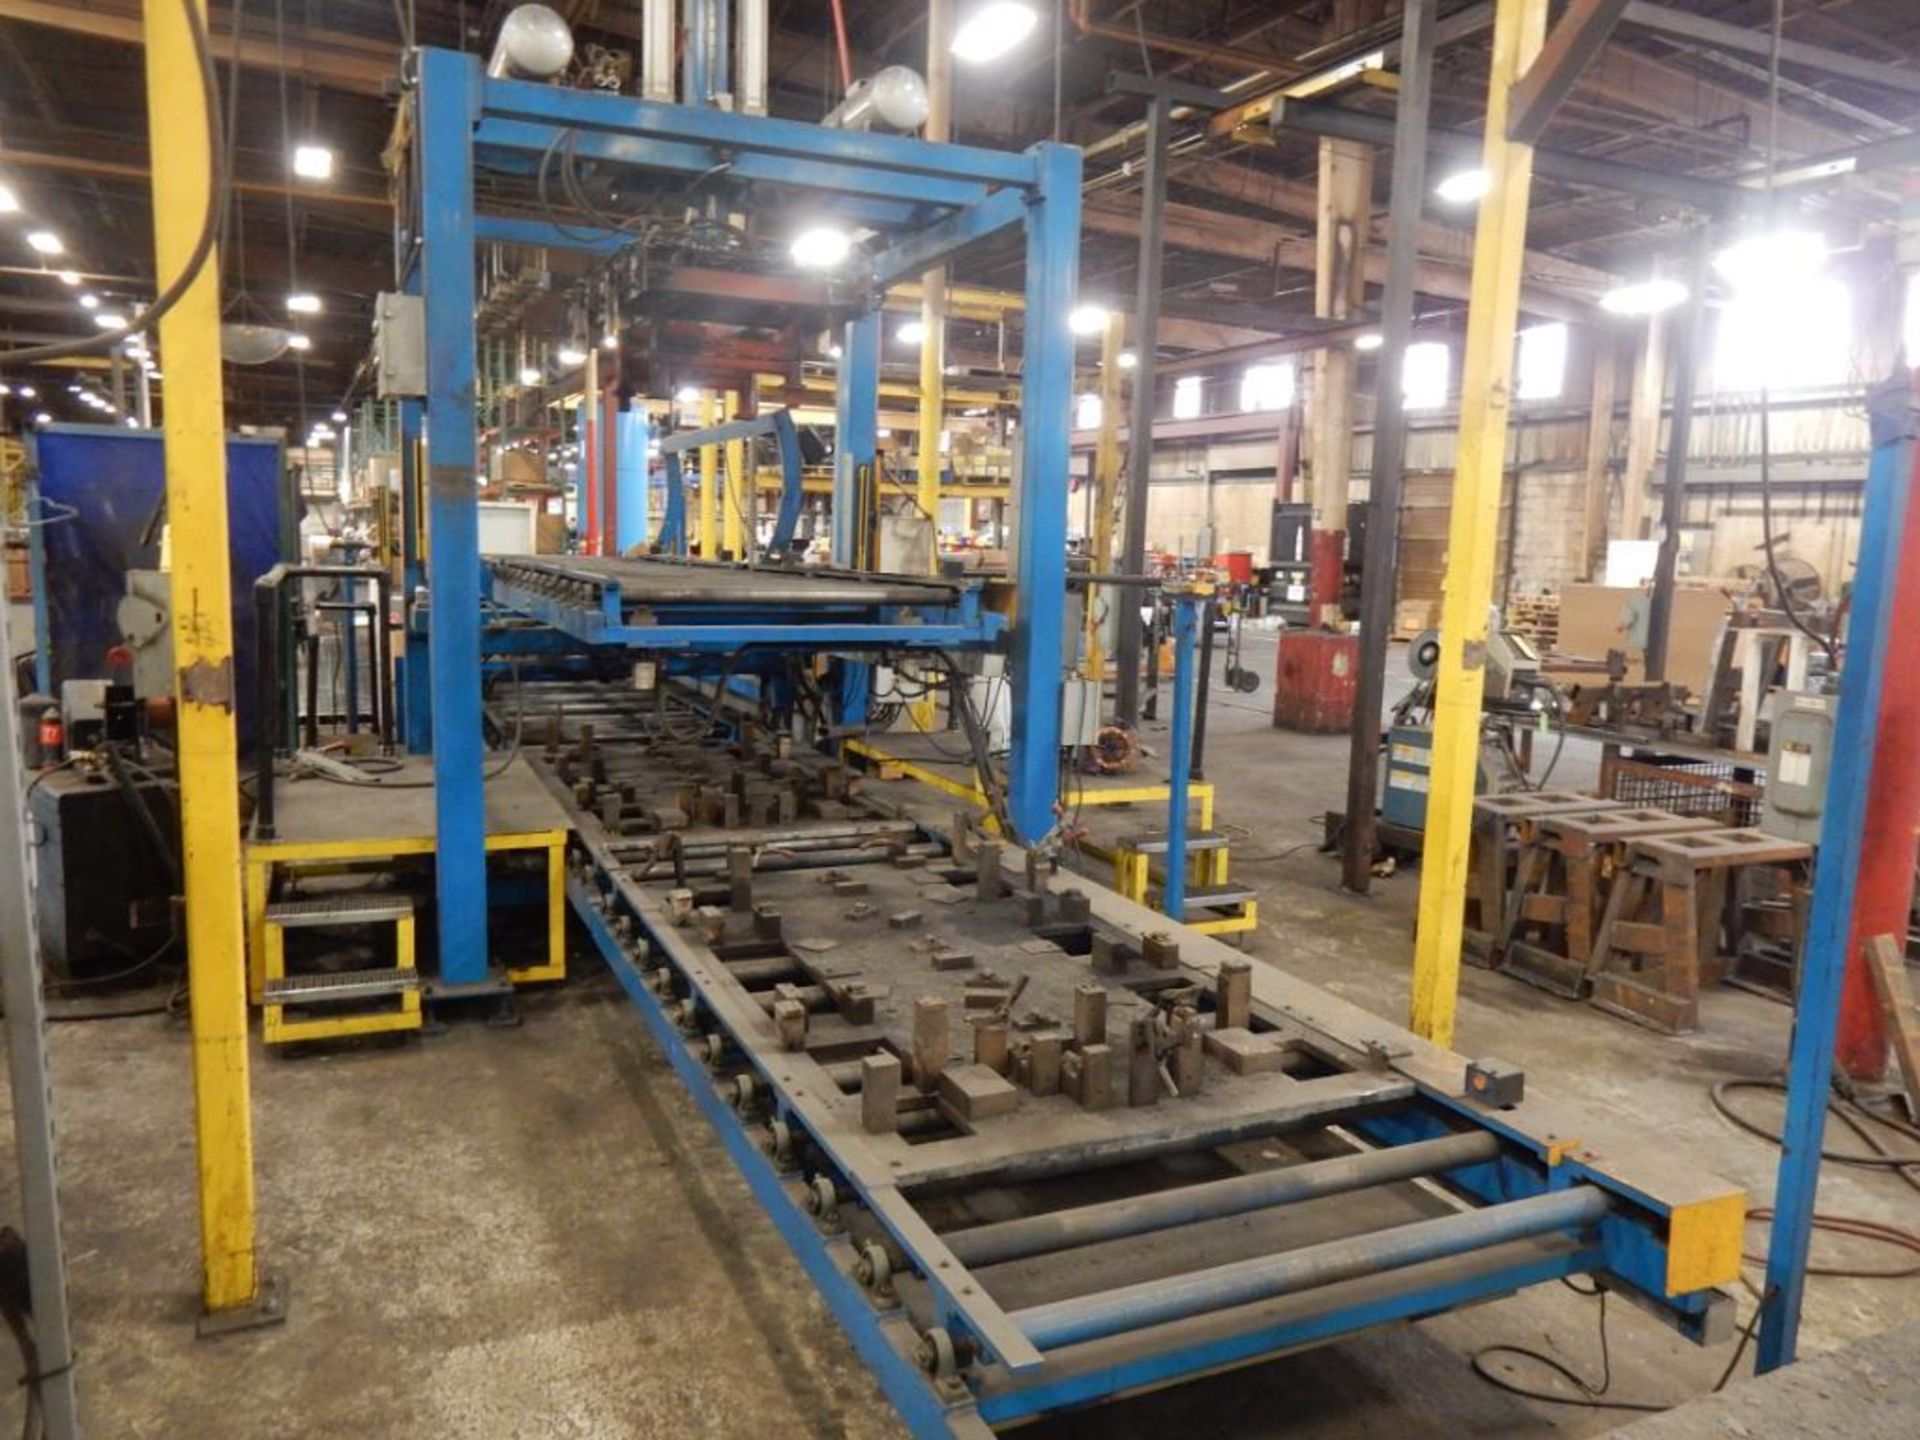 LOT (2) LOAD/UNLOAD STATIONS, CUSTOM BUILT, PNEUMATIC LIFTER, CONVEYOR ROLLERS, STAIRS, ETC.